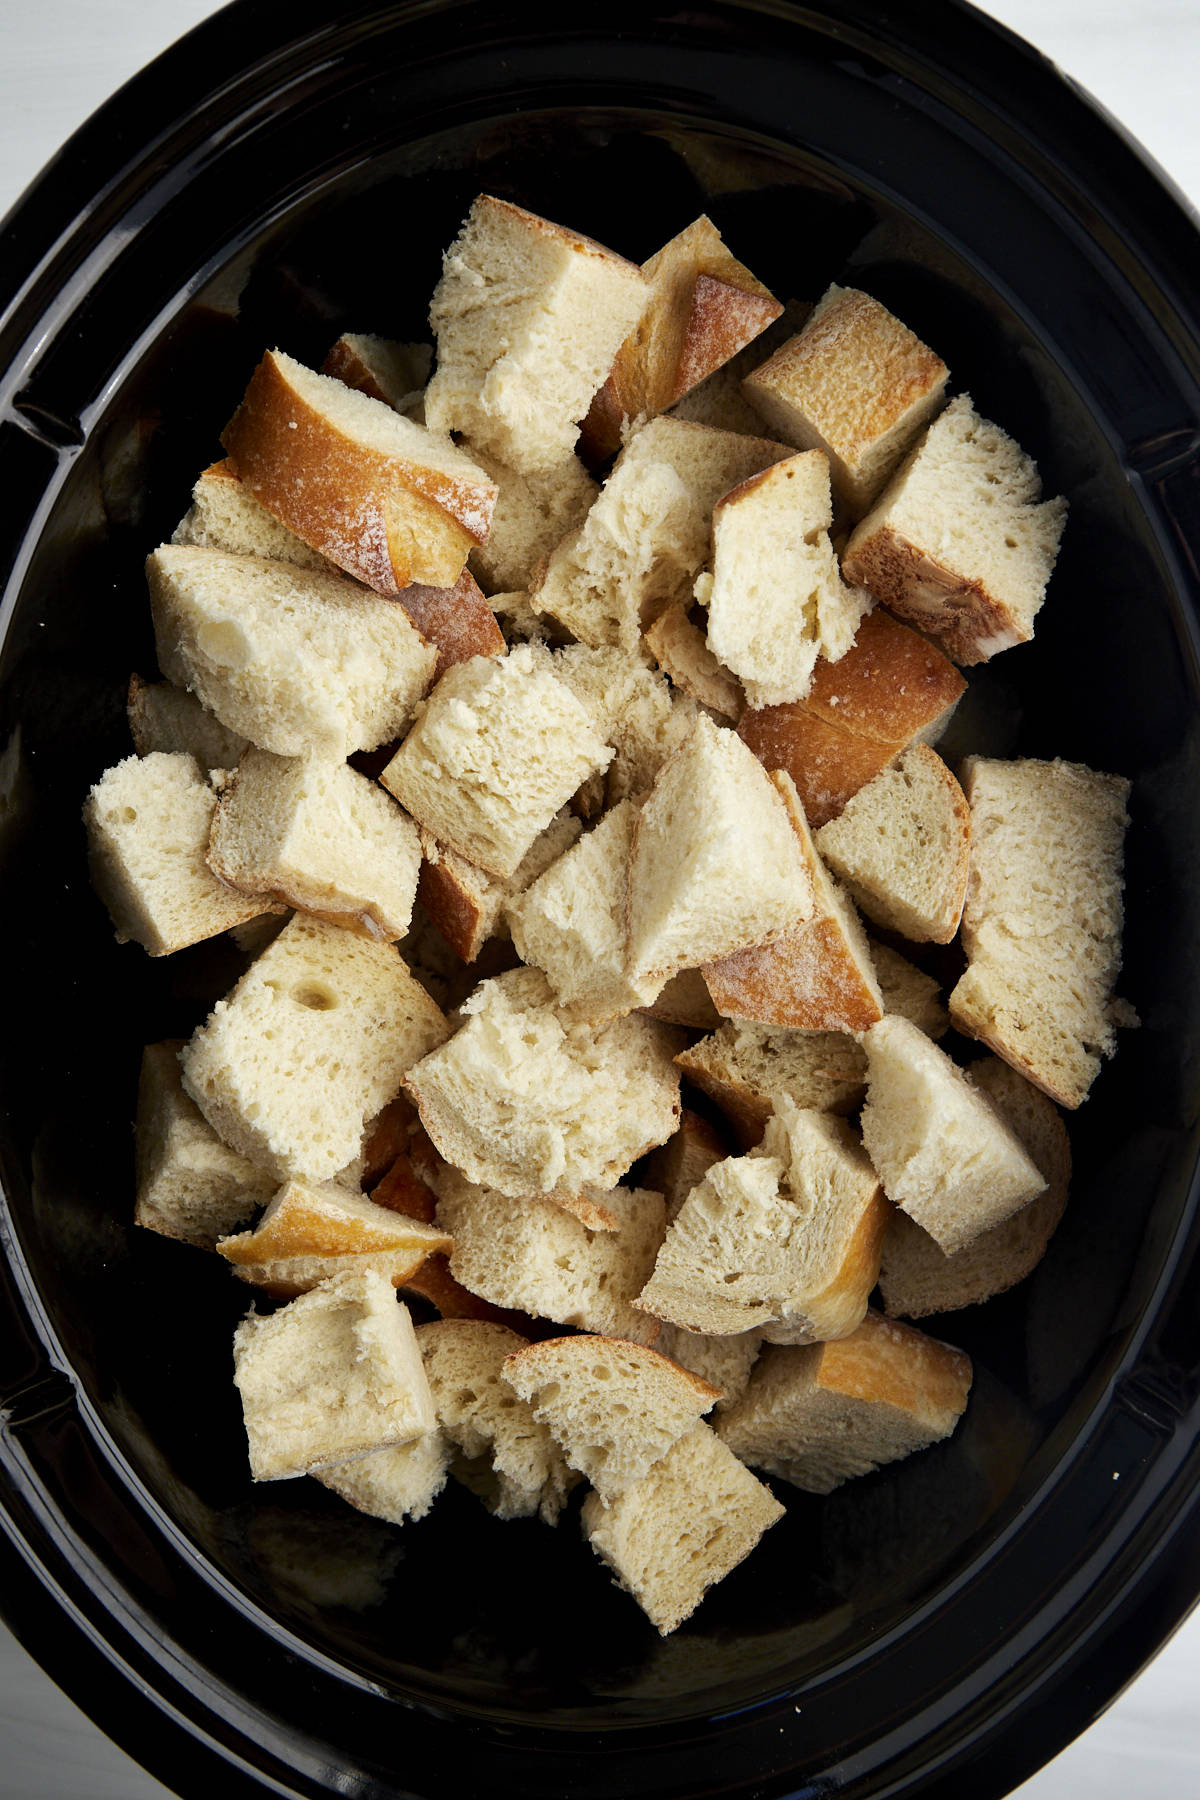 Cubed pieces of bread in a crockpot. 